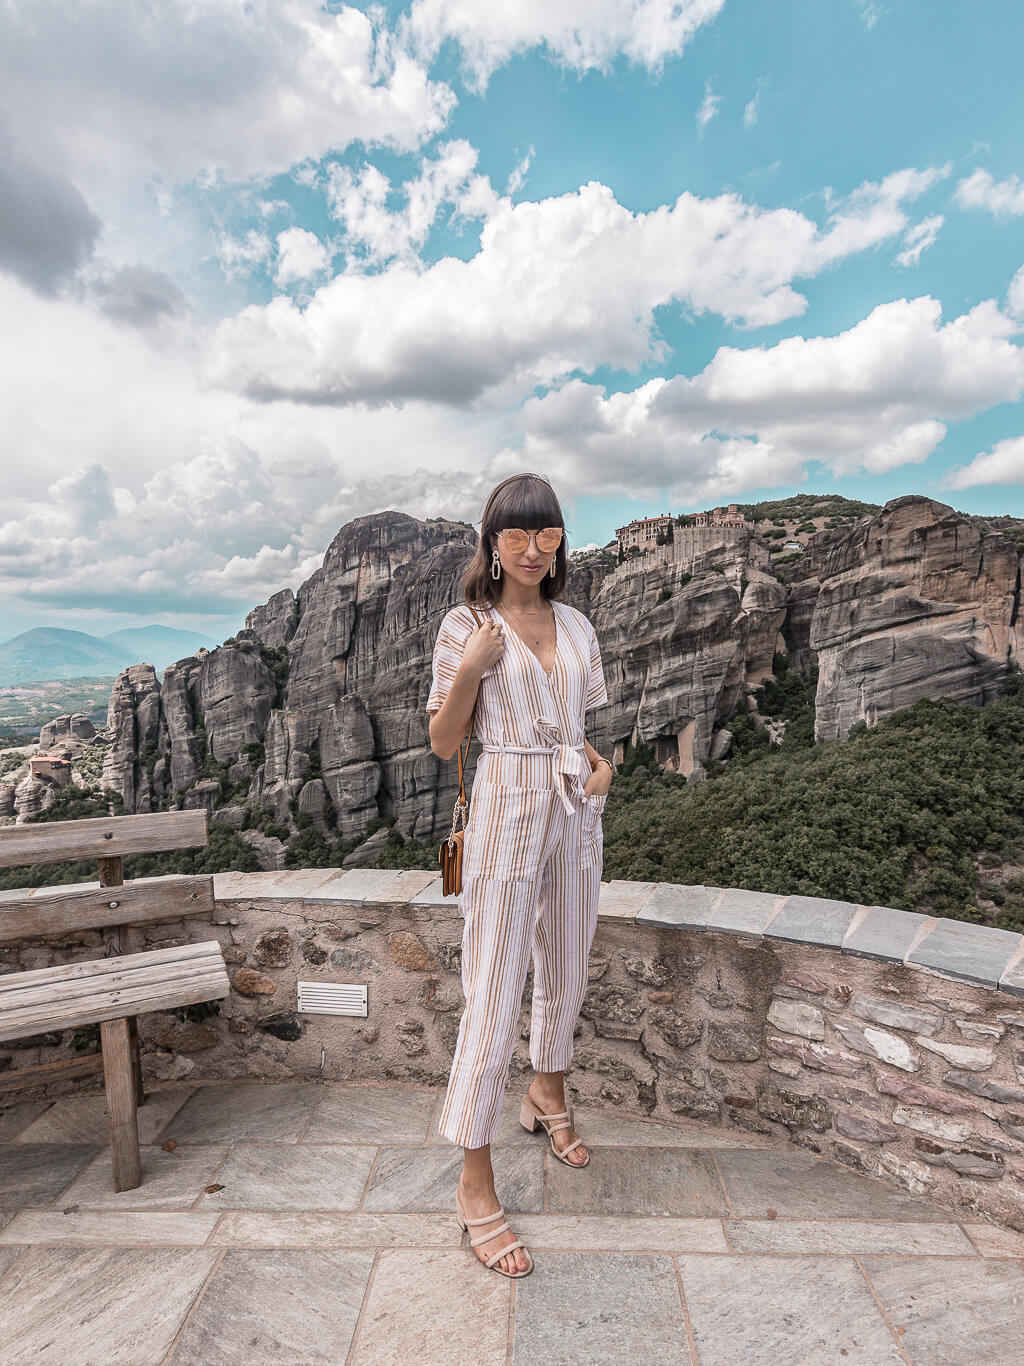 Instagram Outfits Round Up: Vacationing In North Greece